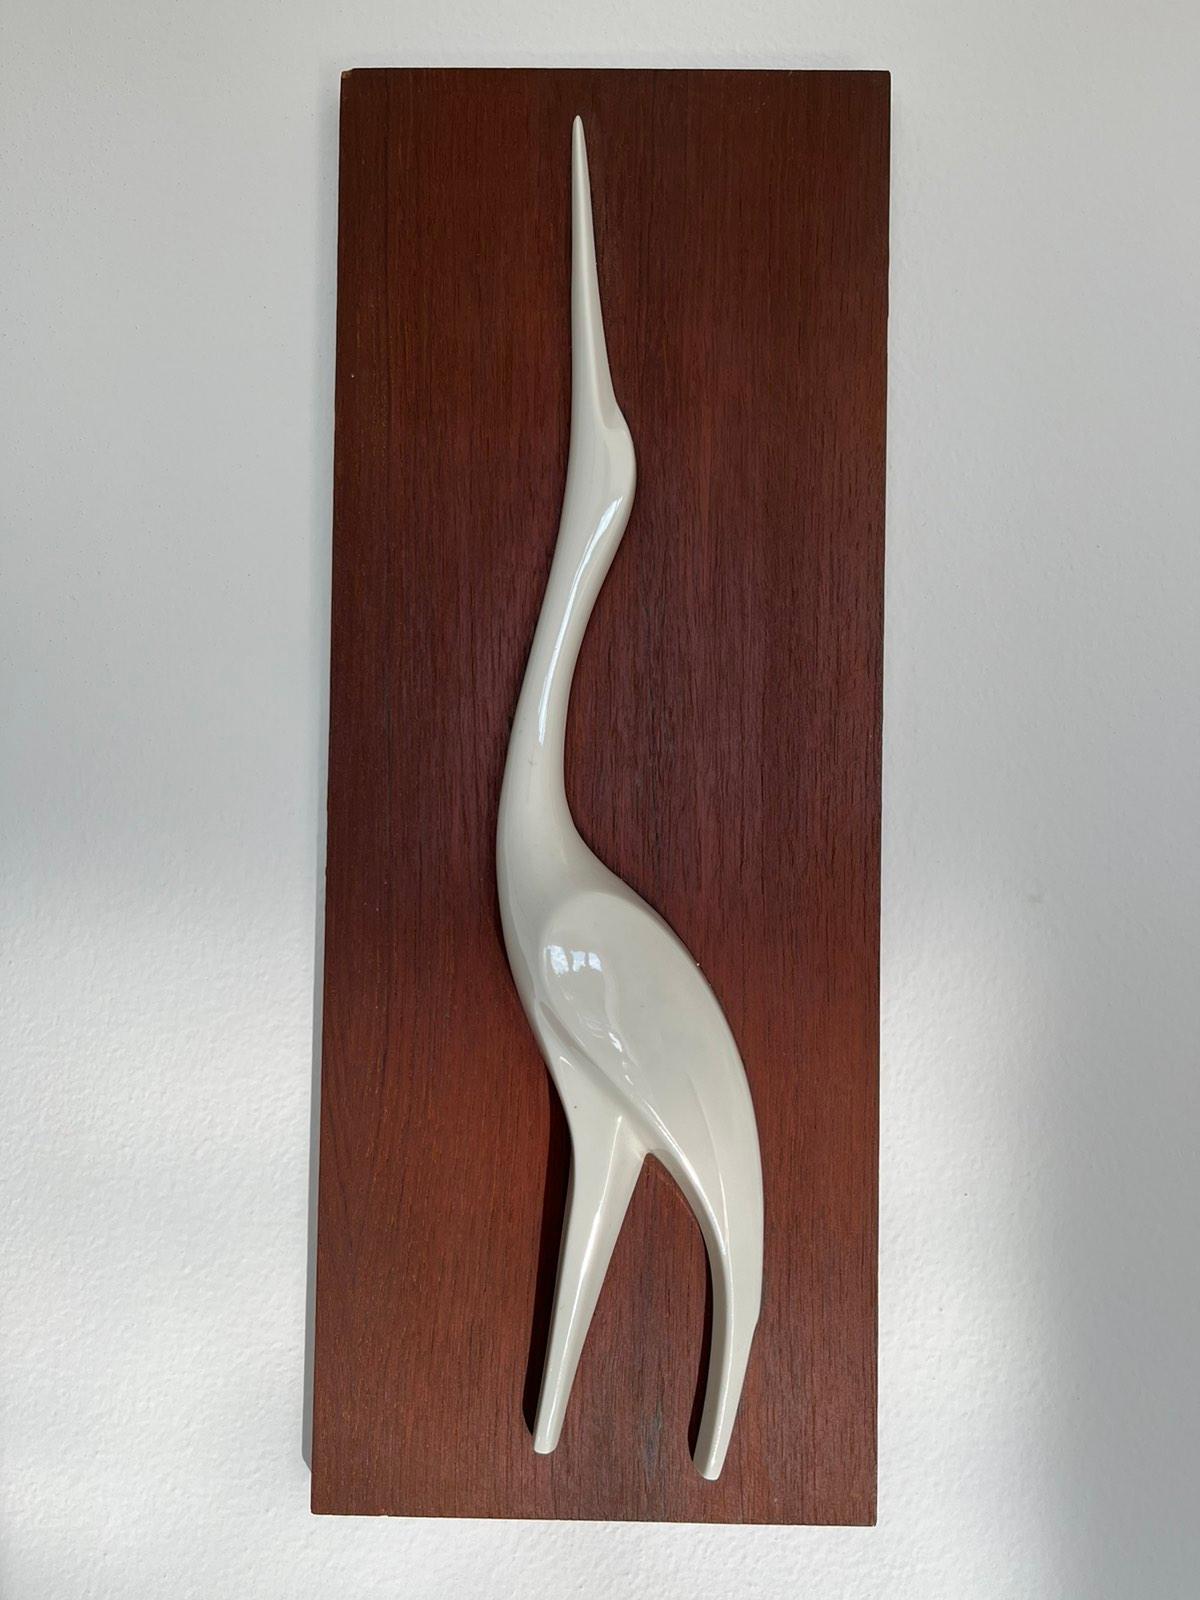 Mid-20th Century Midcentury Wall Decoration Sgrafo Modern, Heron, Bird, Teak and Porcelain, 1960s For Sale